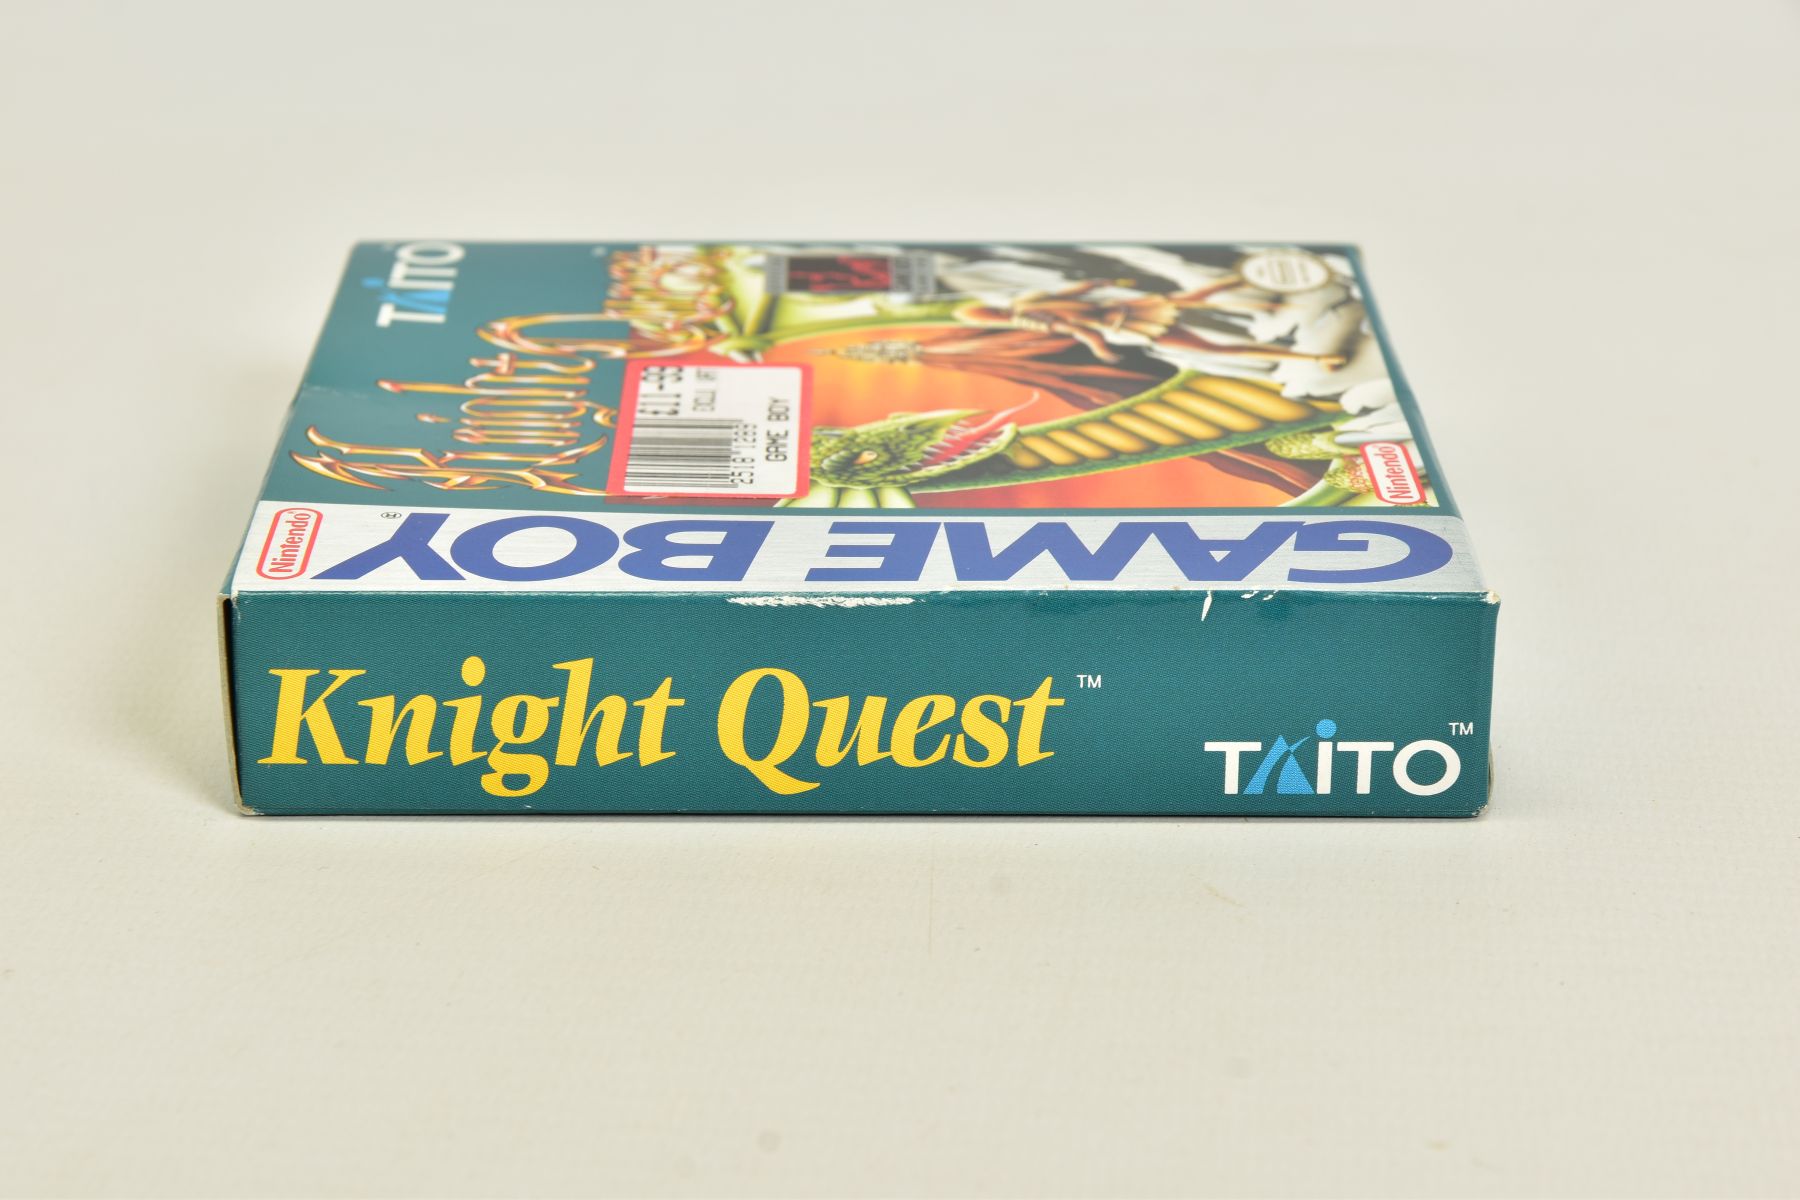 KNIGHT QUEST GAMEBOY GAME BOXED, very rare Gameboy RPG boxed with its manual; some moderate wear - Image 4 of 8